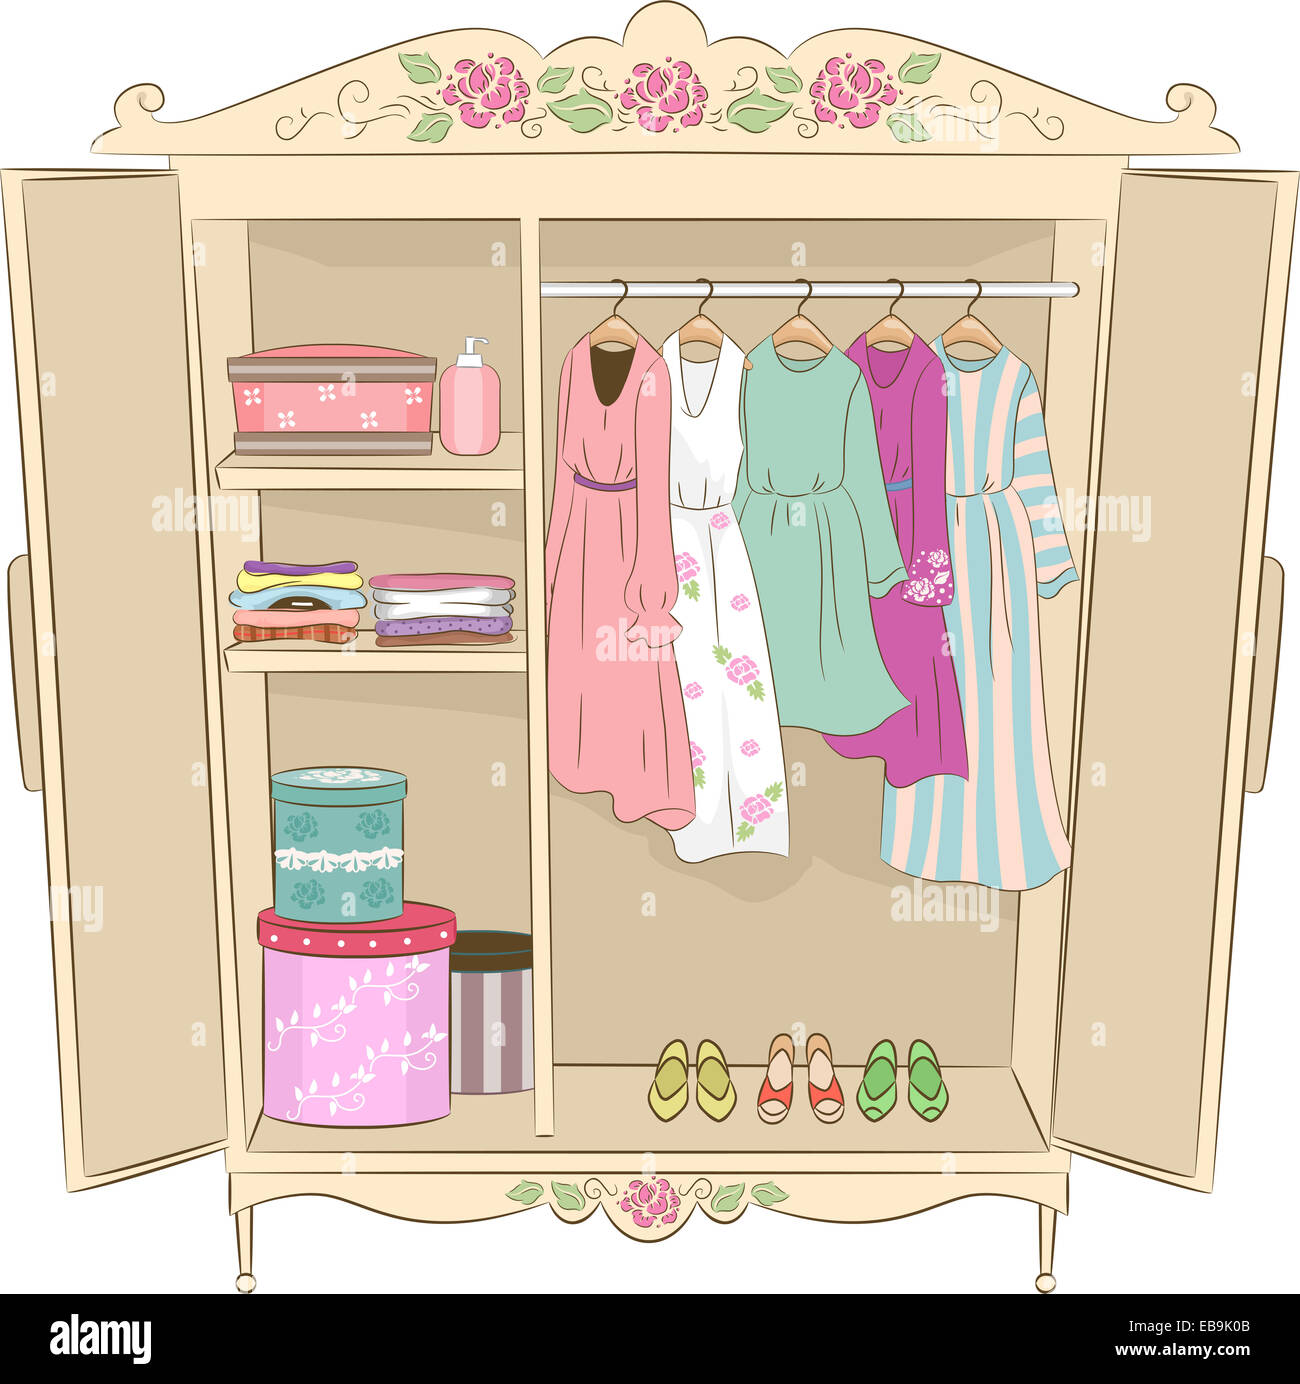 Illustration Featuring an Armoire with a Shabby Chic Design Stock Photo ...